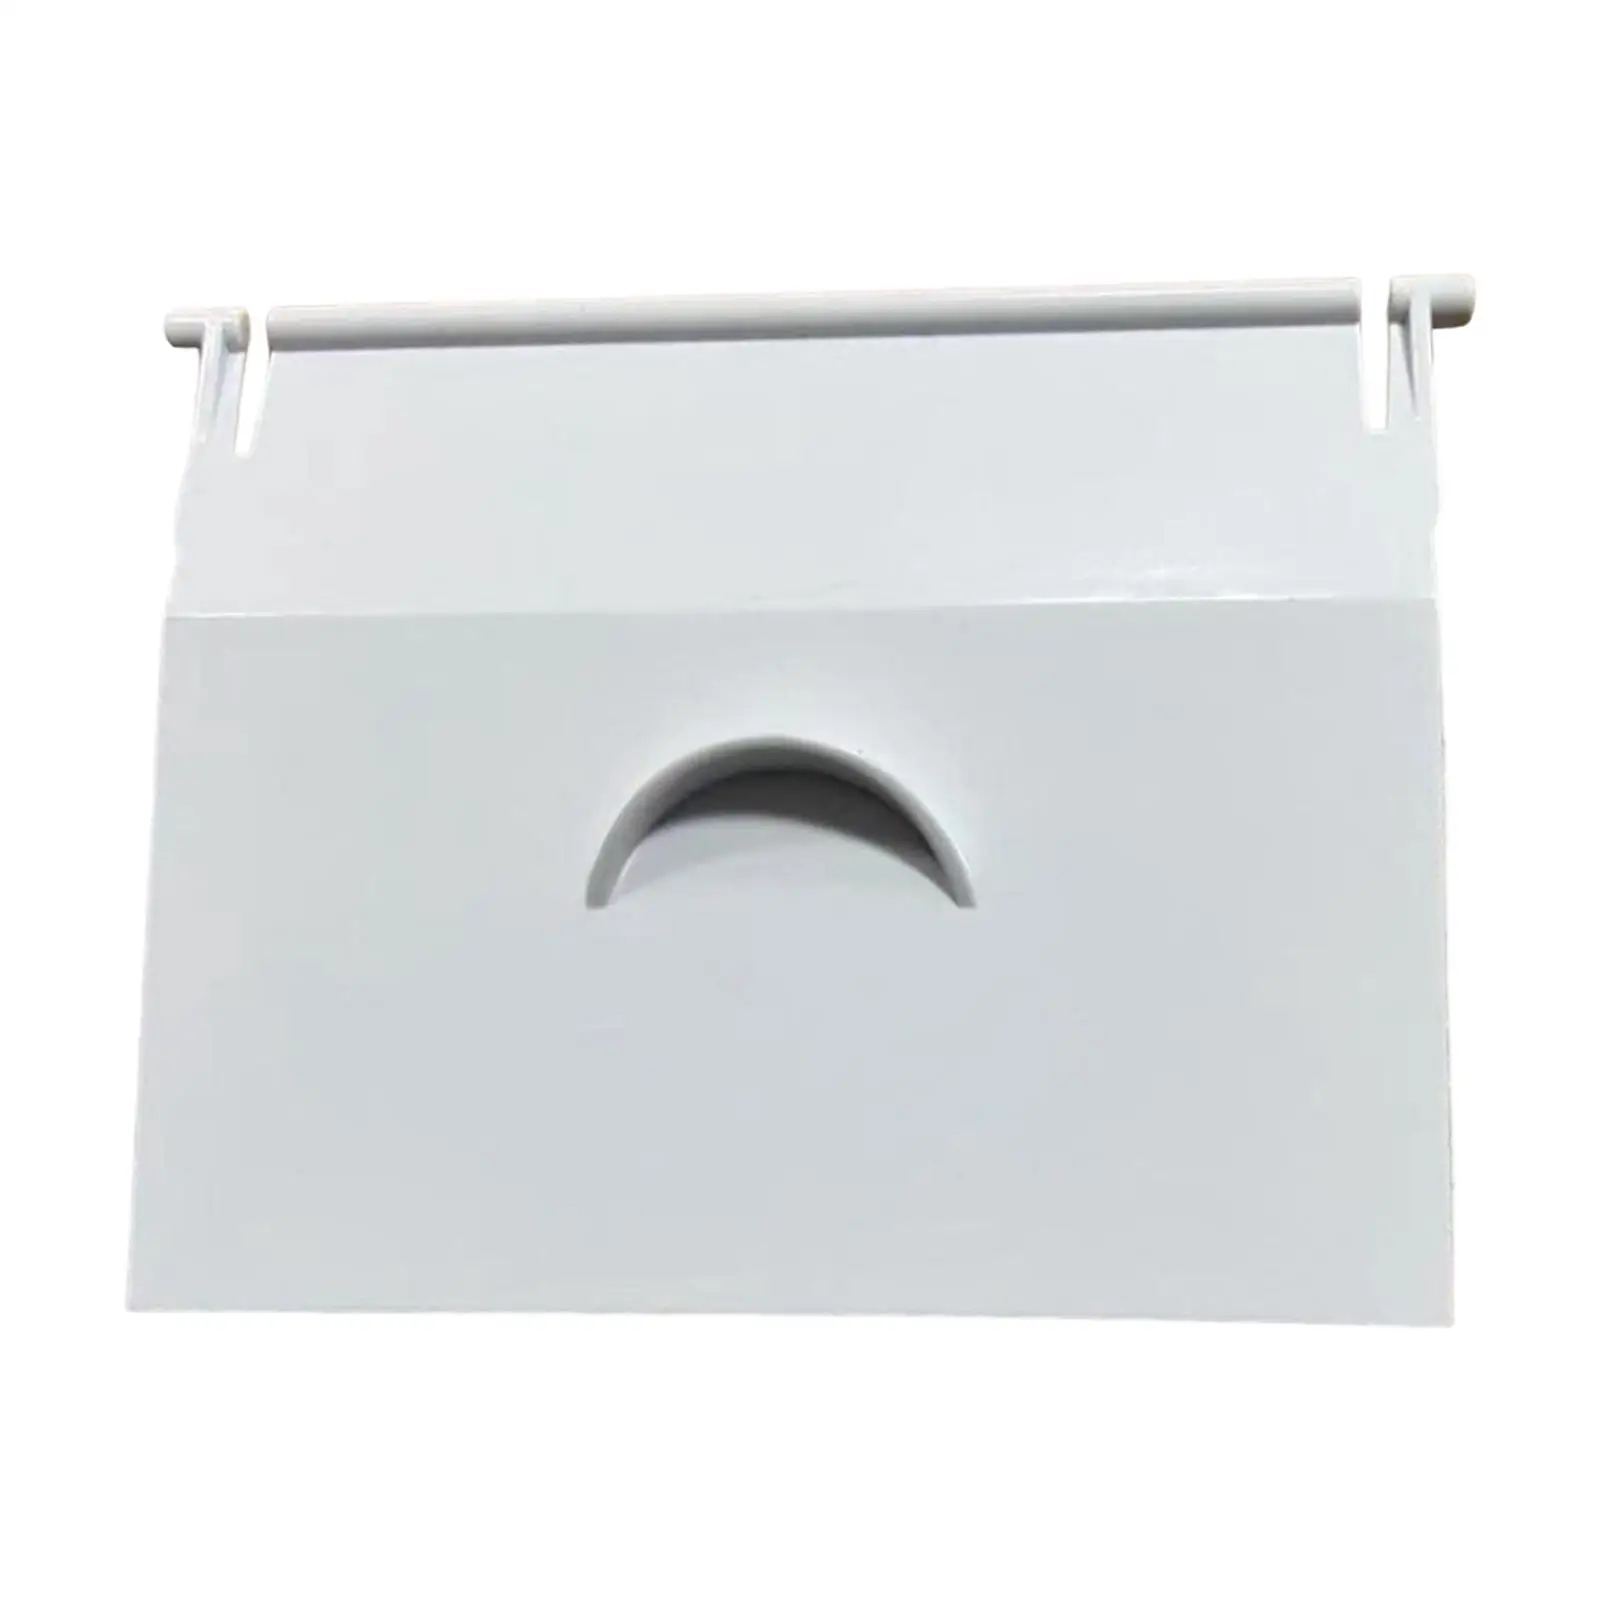 Gate Baffle with Sponge Rust Resistant Fittings Swimming Pool Skimmer Gate Weir Baffle White Weir Gate Assembly for Spx1091 Accs